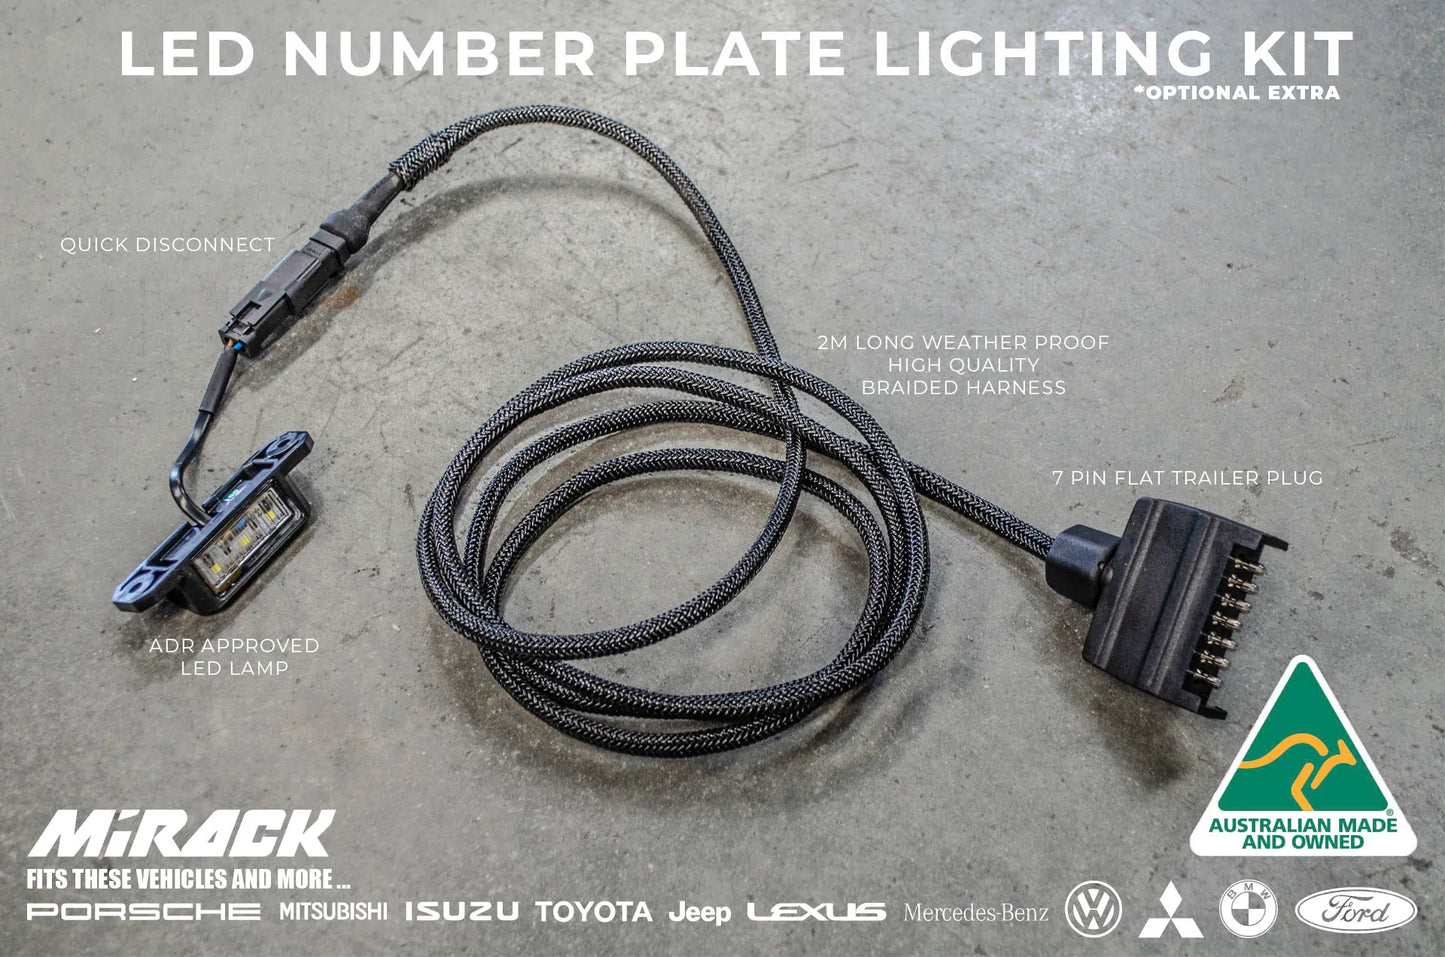 ADR-approved LED trailer lighting kit: Conquer any road with bright illumination and a 2m weatherproof harness.